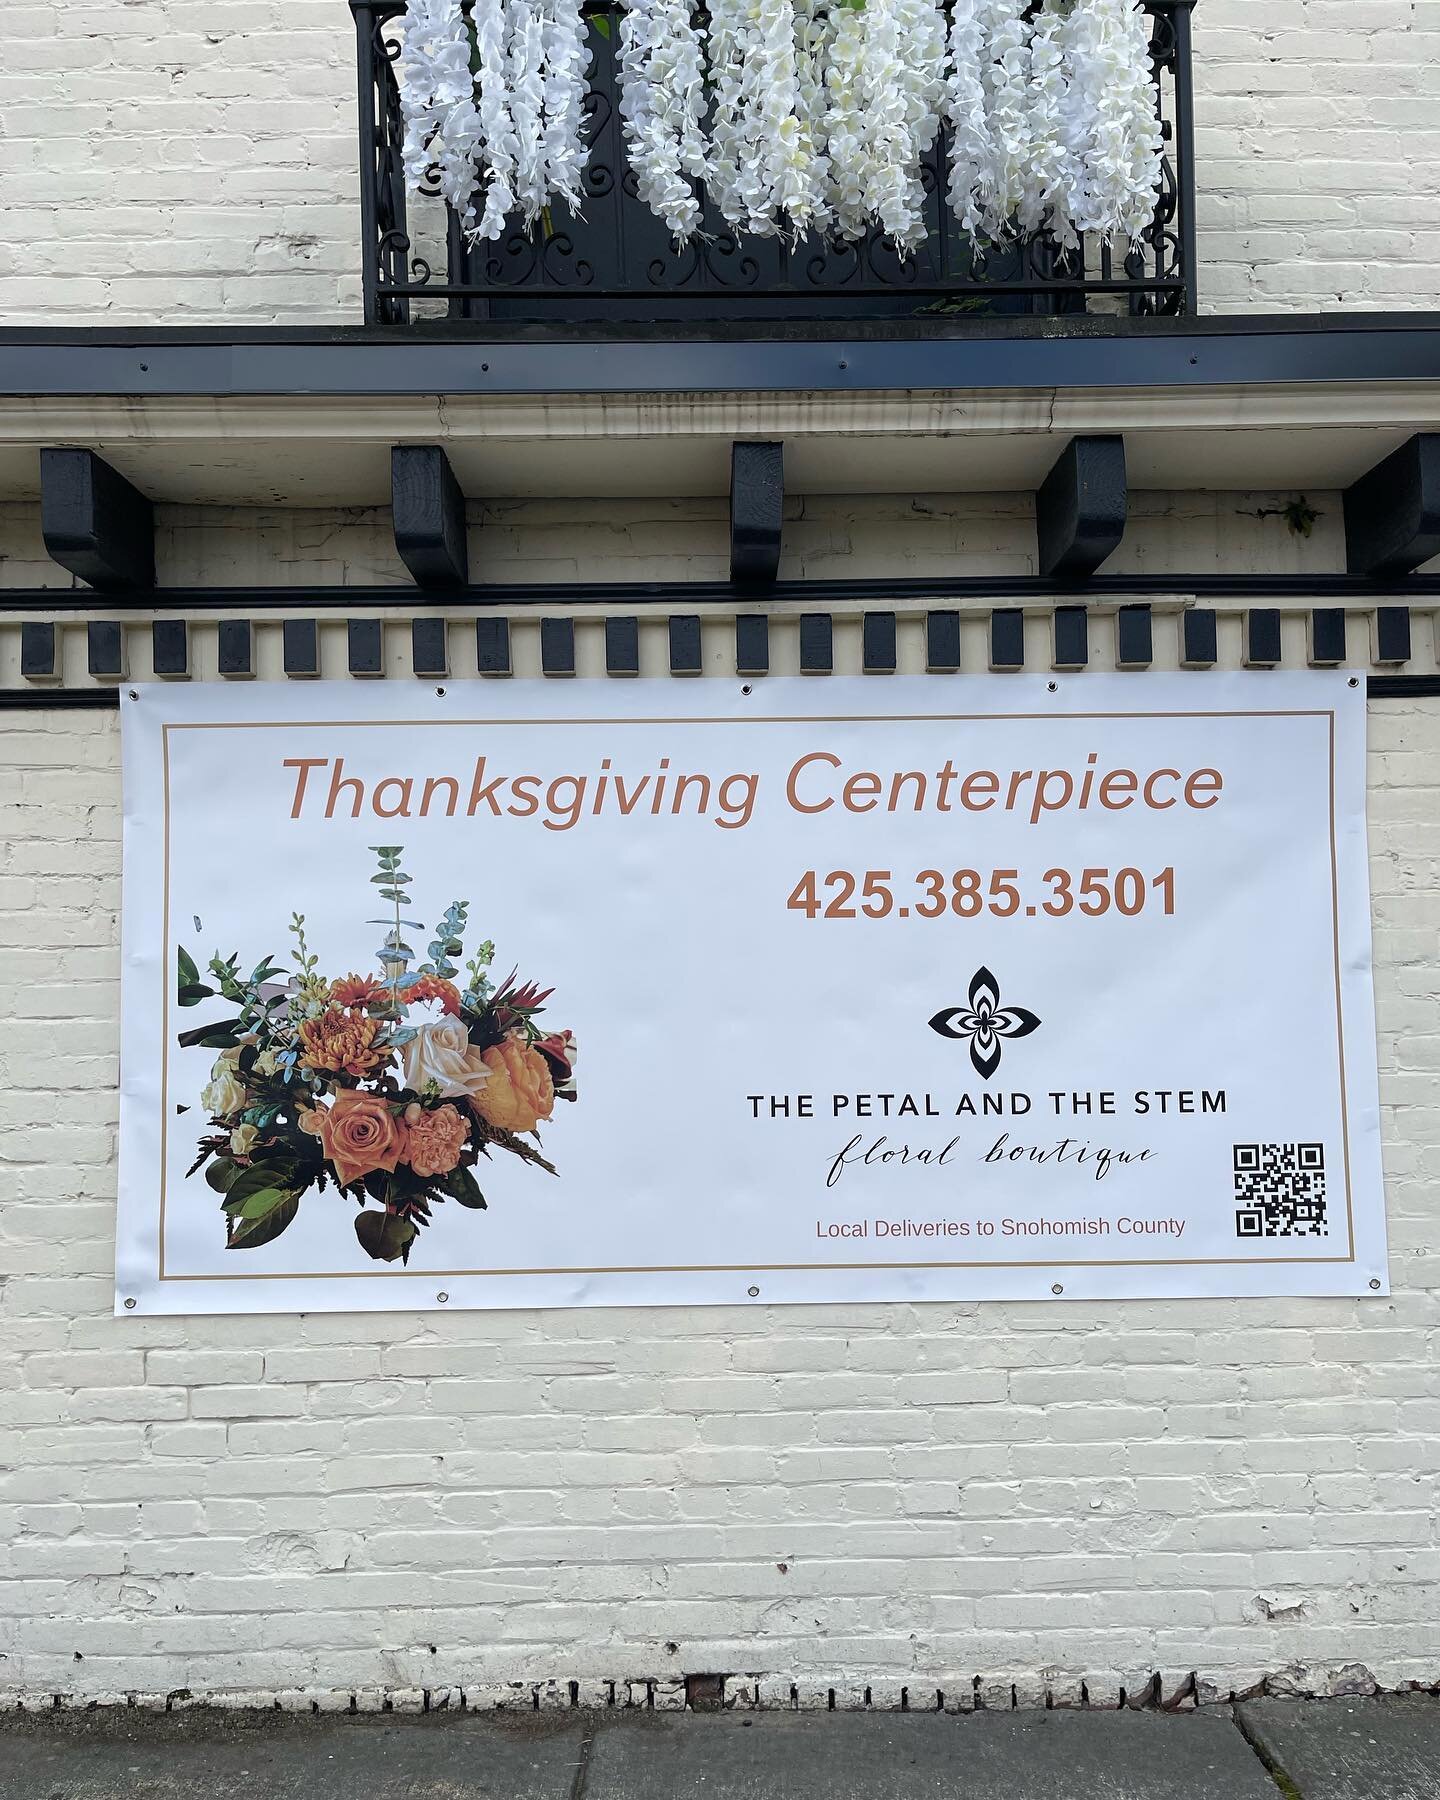 Pre-Order your Centerpieces for Thanksgiving, Christmas, and Other holidays.

#thepetalandthestem #snohomishflorsist #holidaycemterpieces #thanksgivingdecor #thanksgivingdinner #thanksgivingfloralarrangements